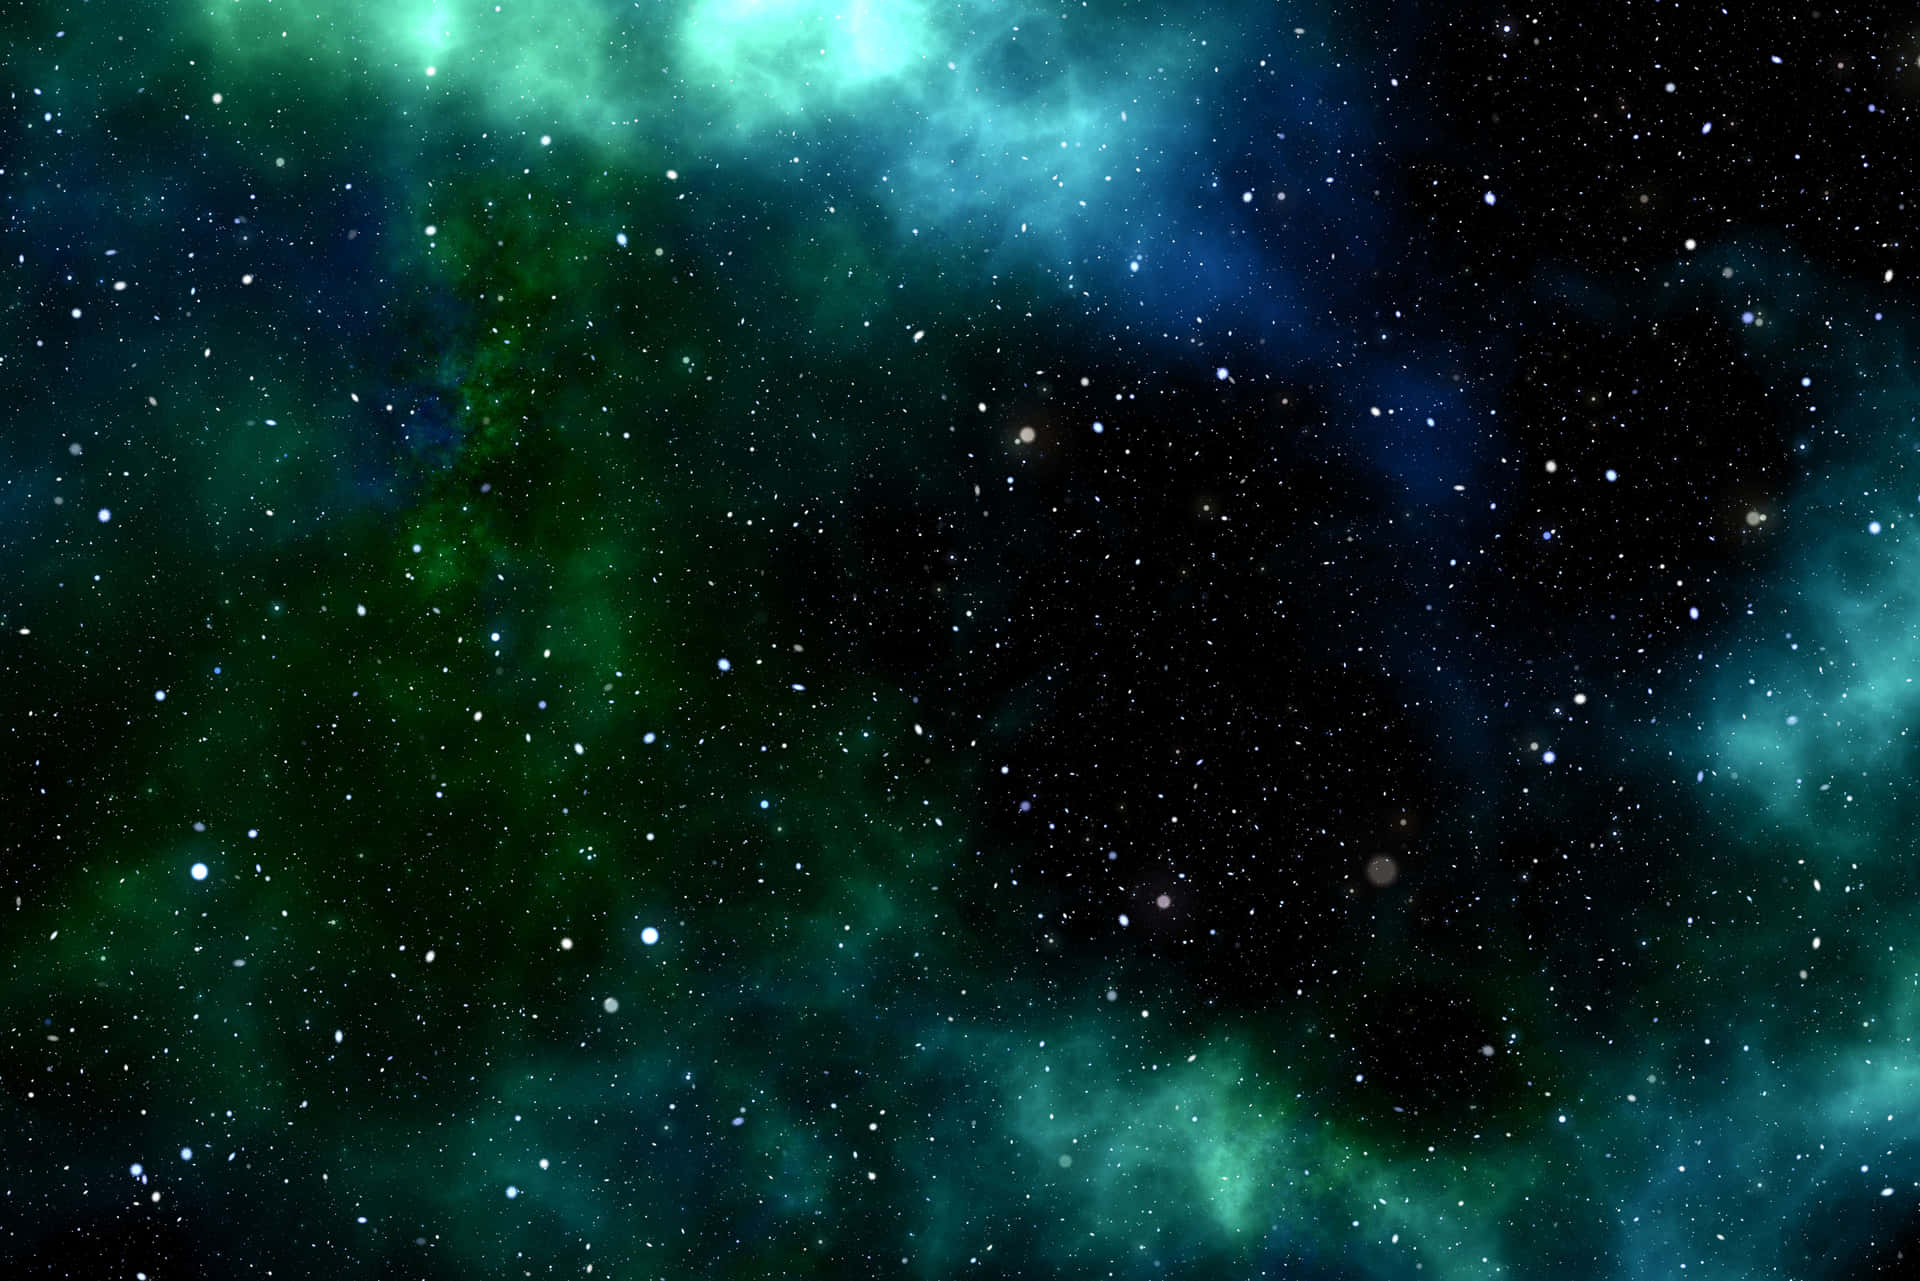 Explore the Cosmic Horizons of the Green and Blue Galaxy Wallpaper